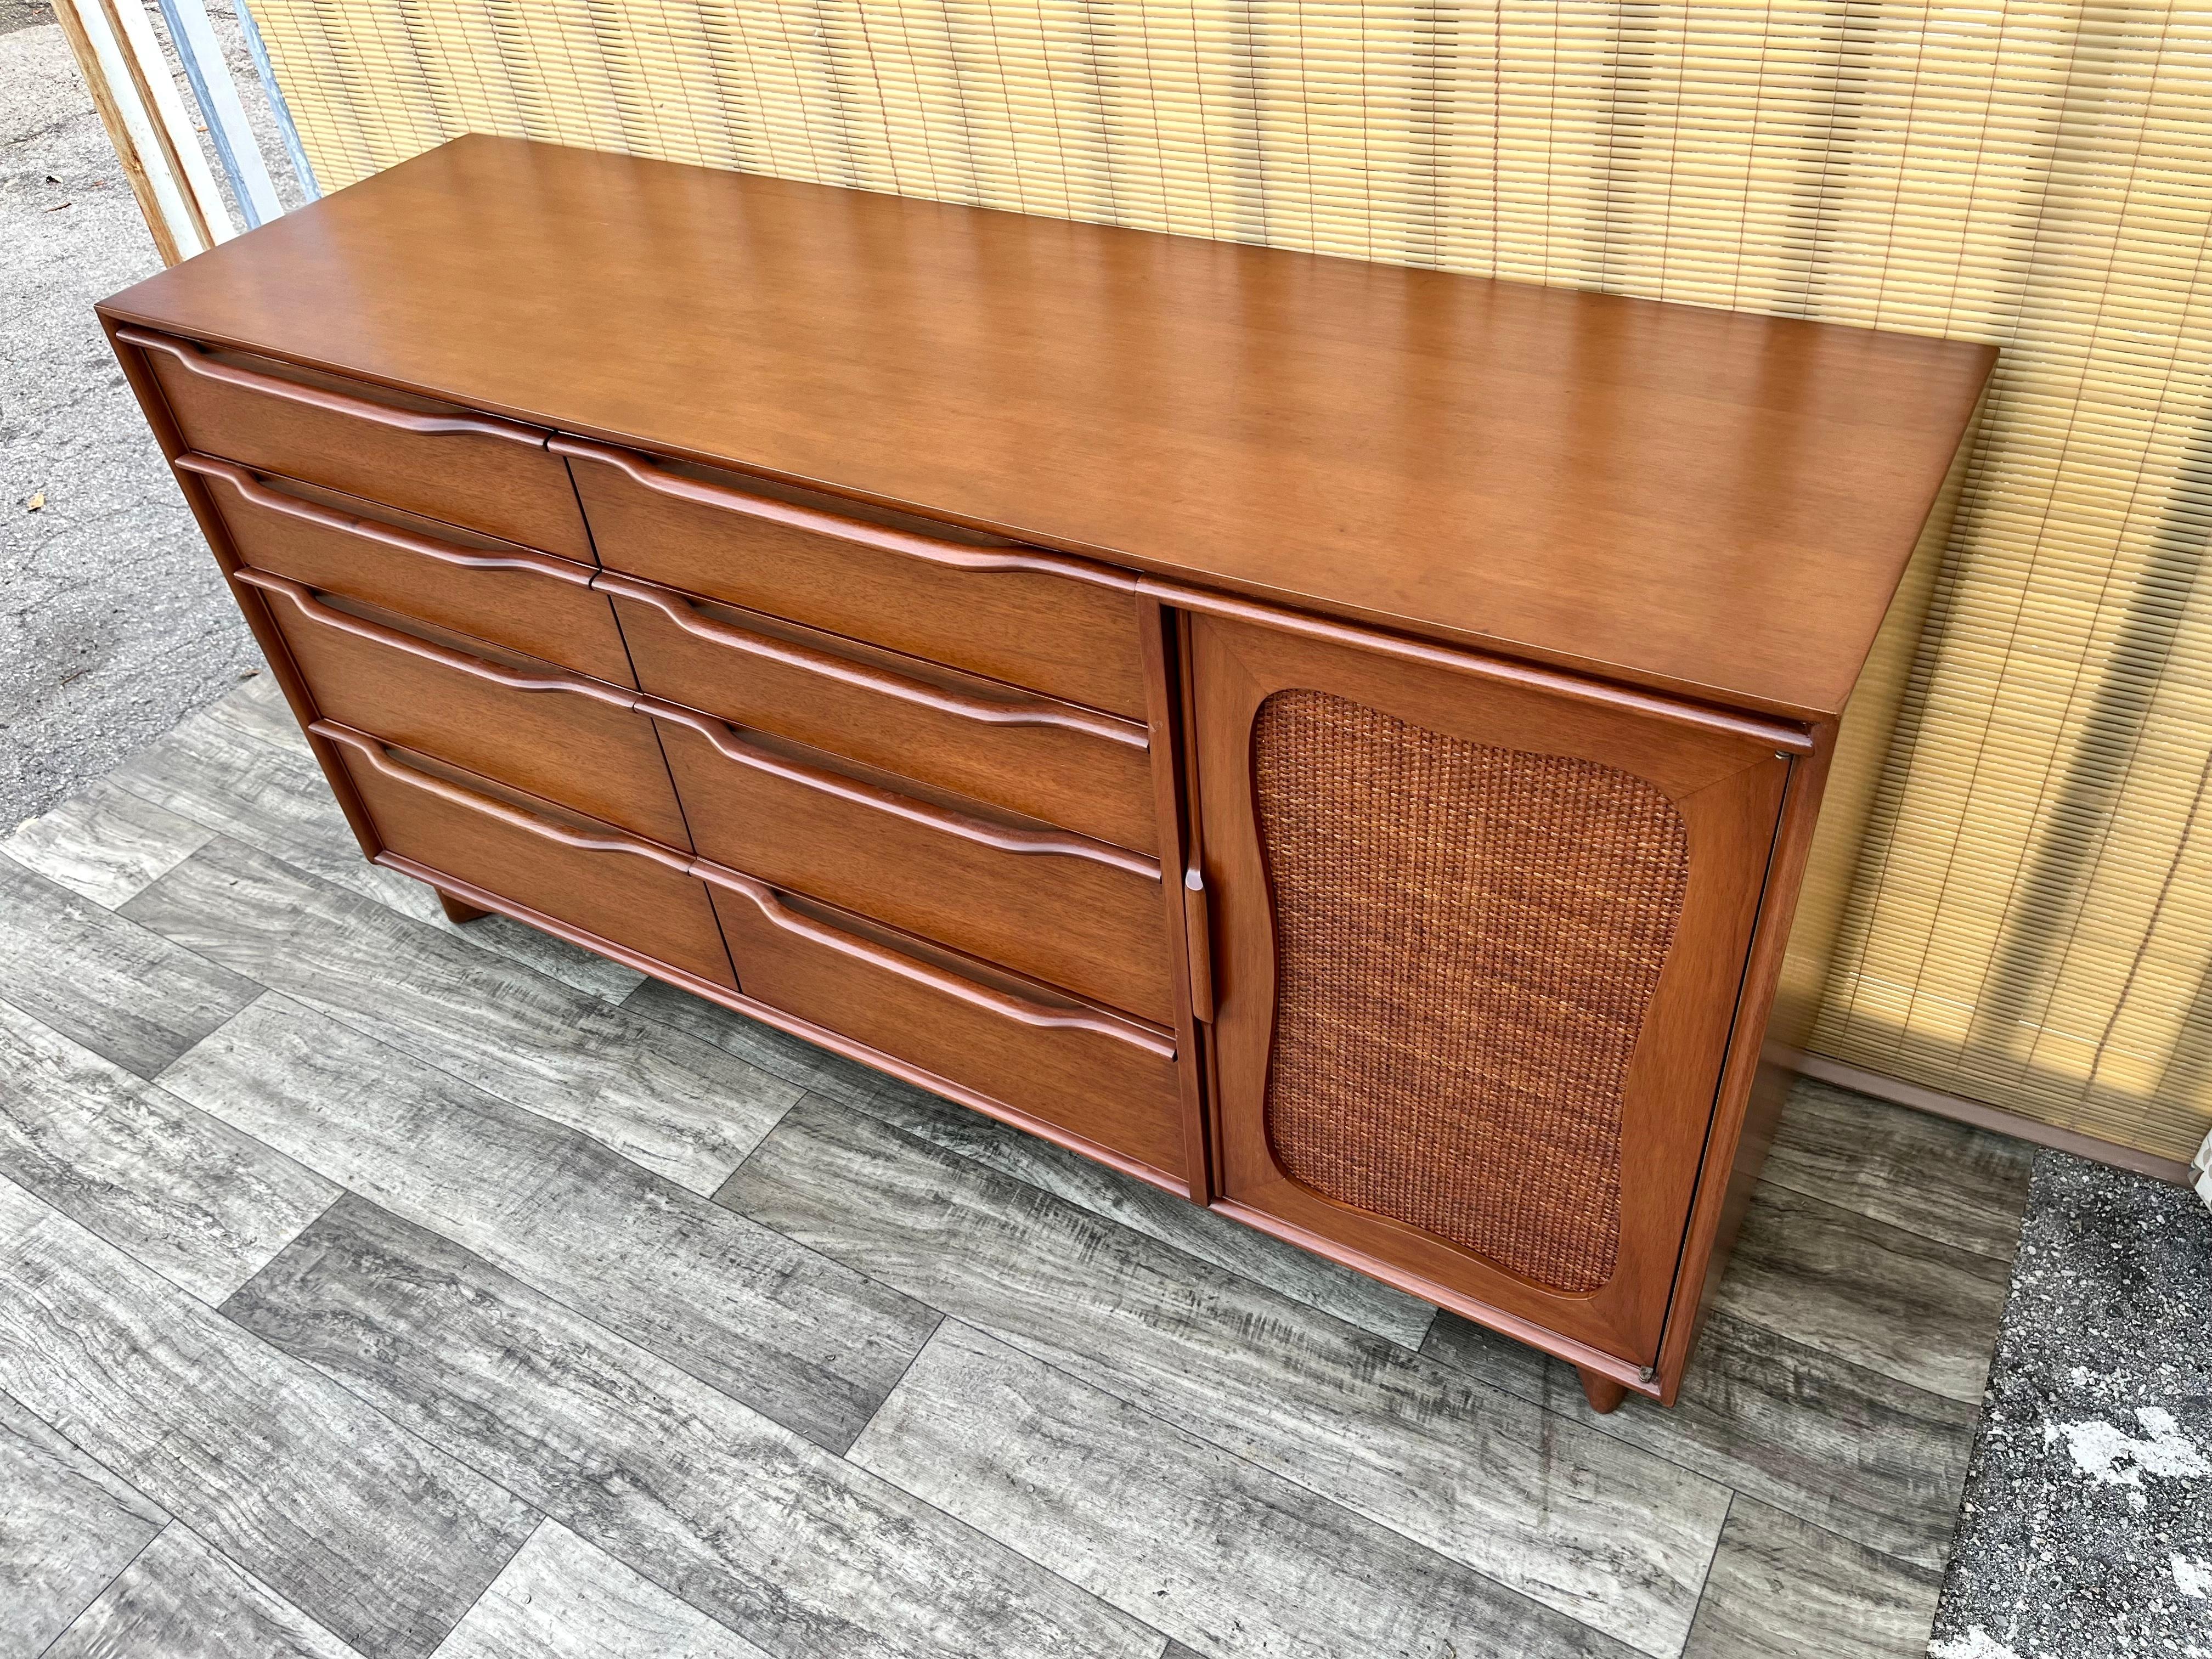 American Fully Refinished Mid Century Modern Dresser by Hickory Manufacturing Company. For Sale